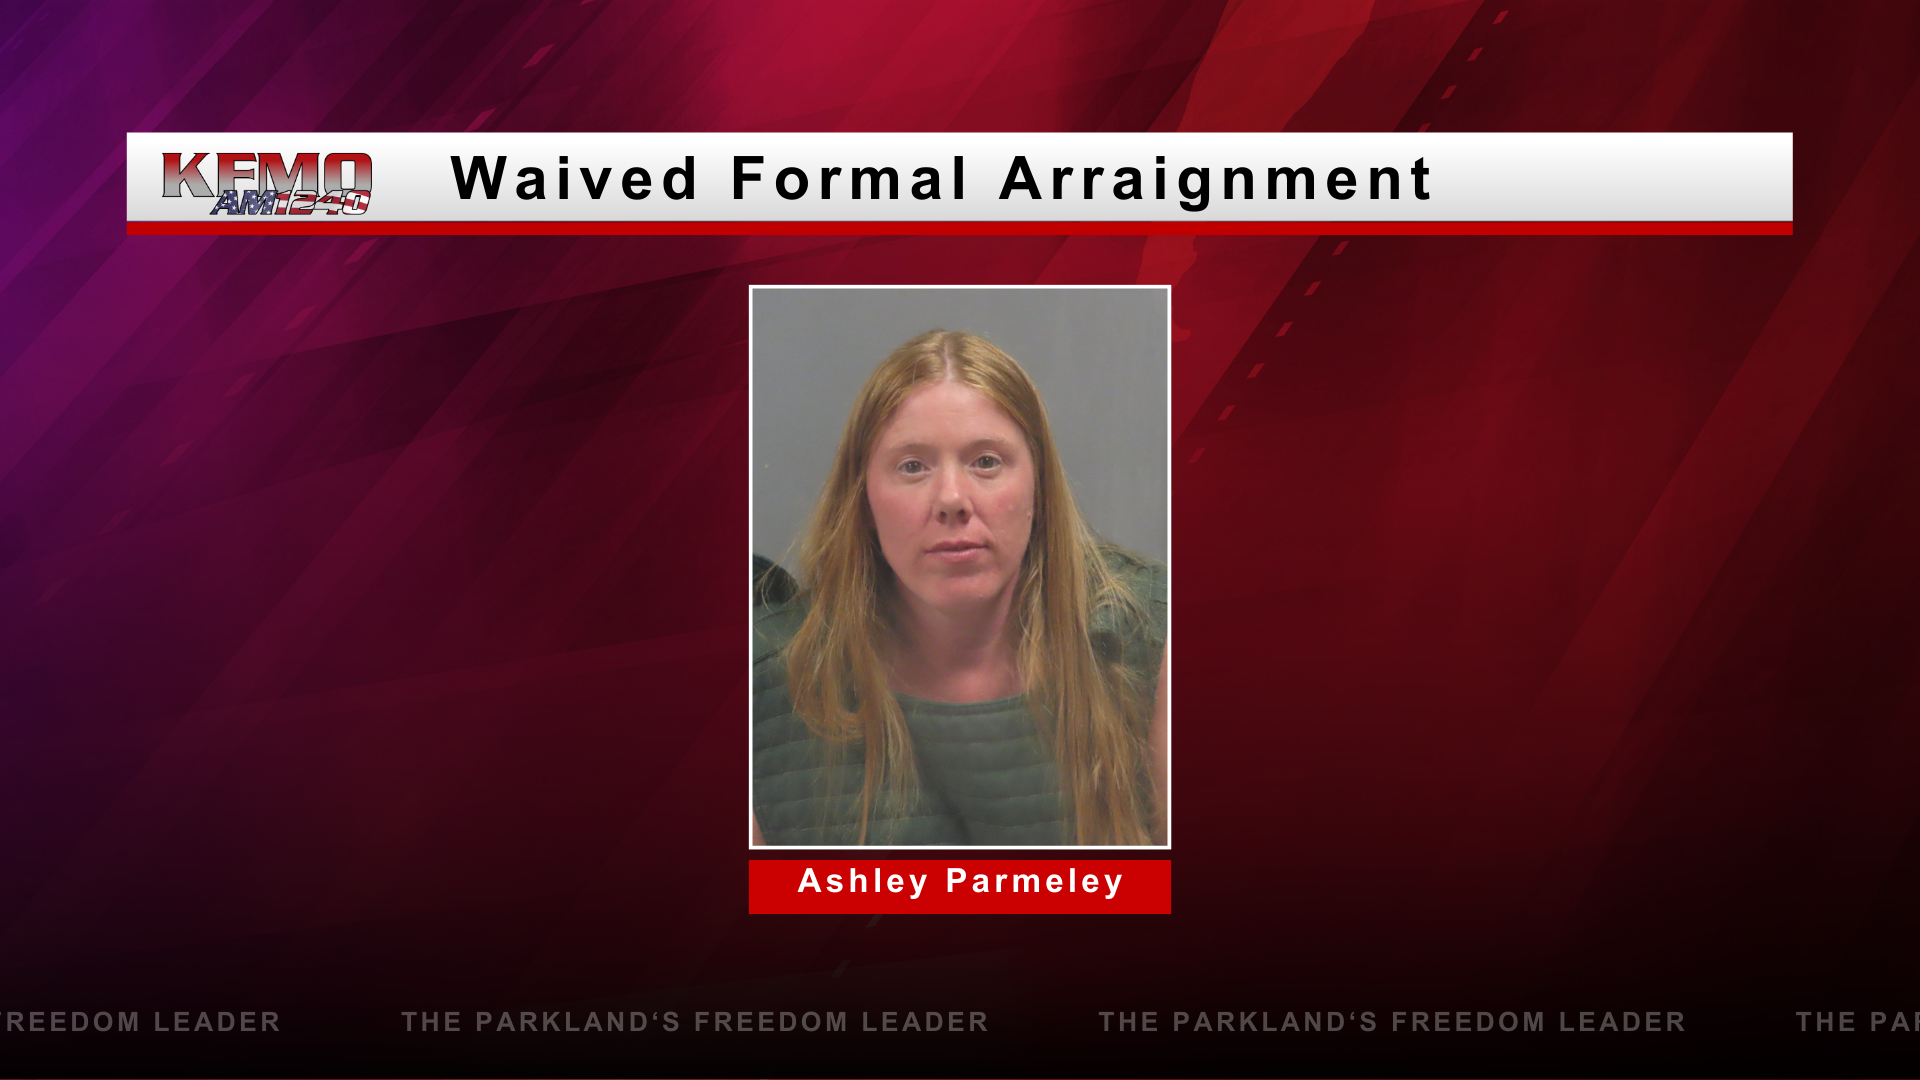 Parmeley Waives Formal Arraignment